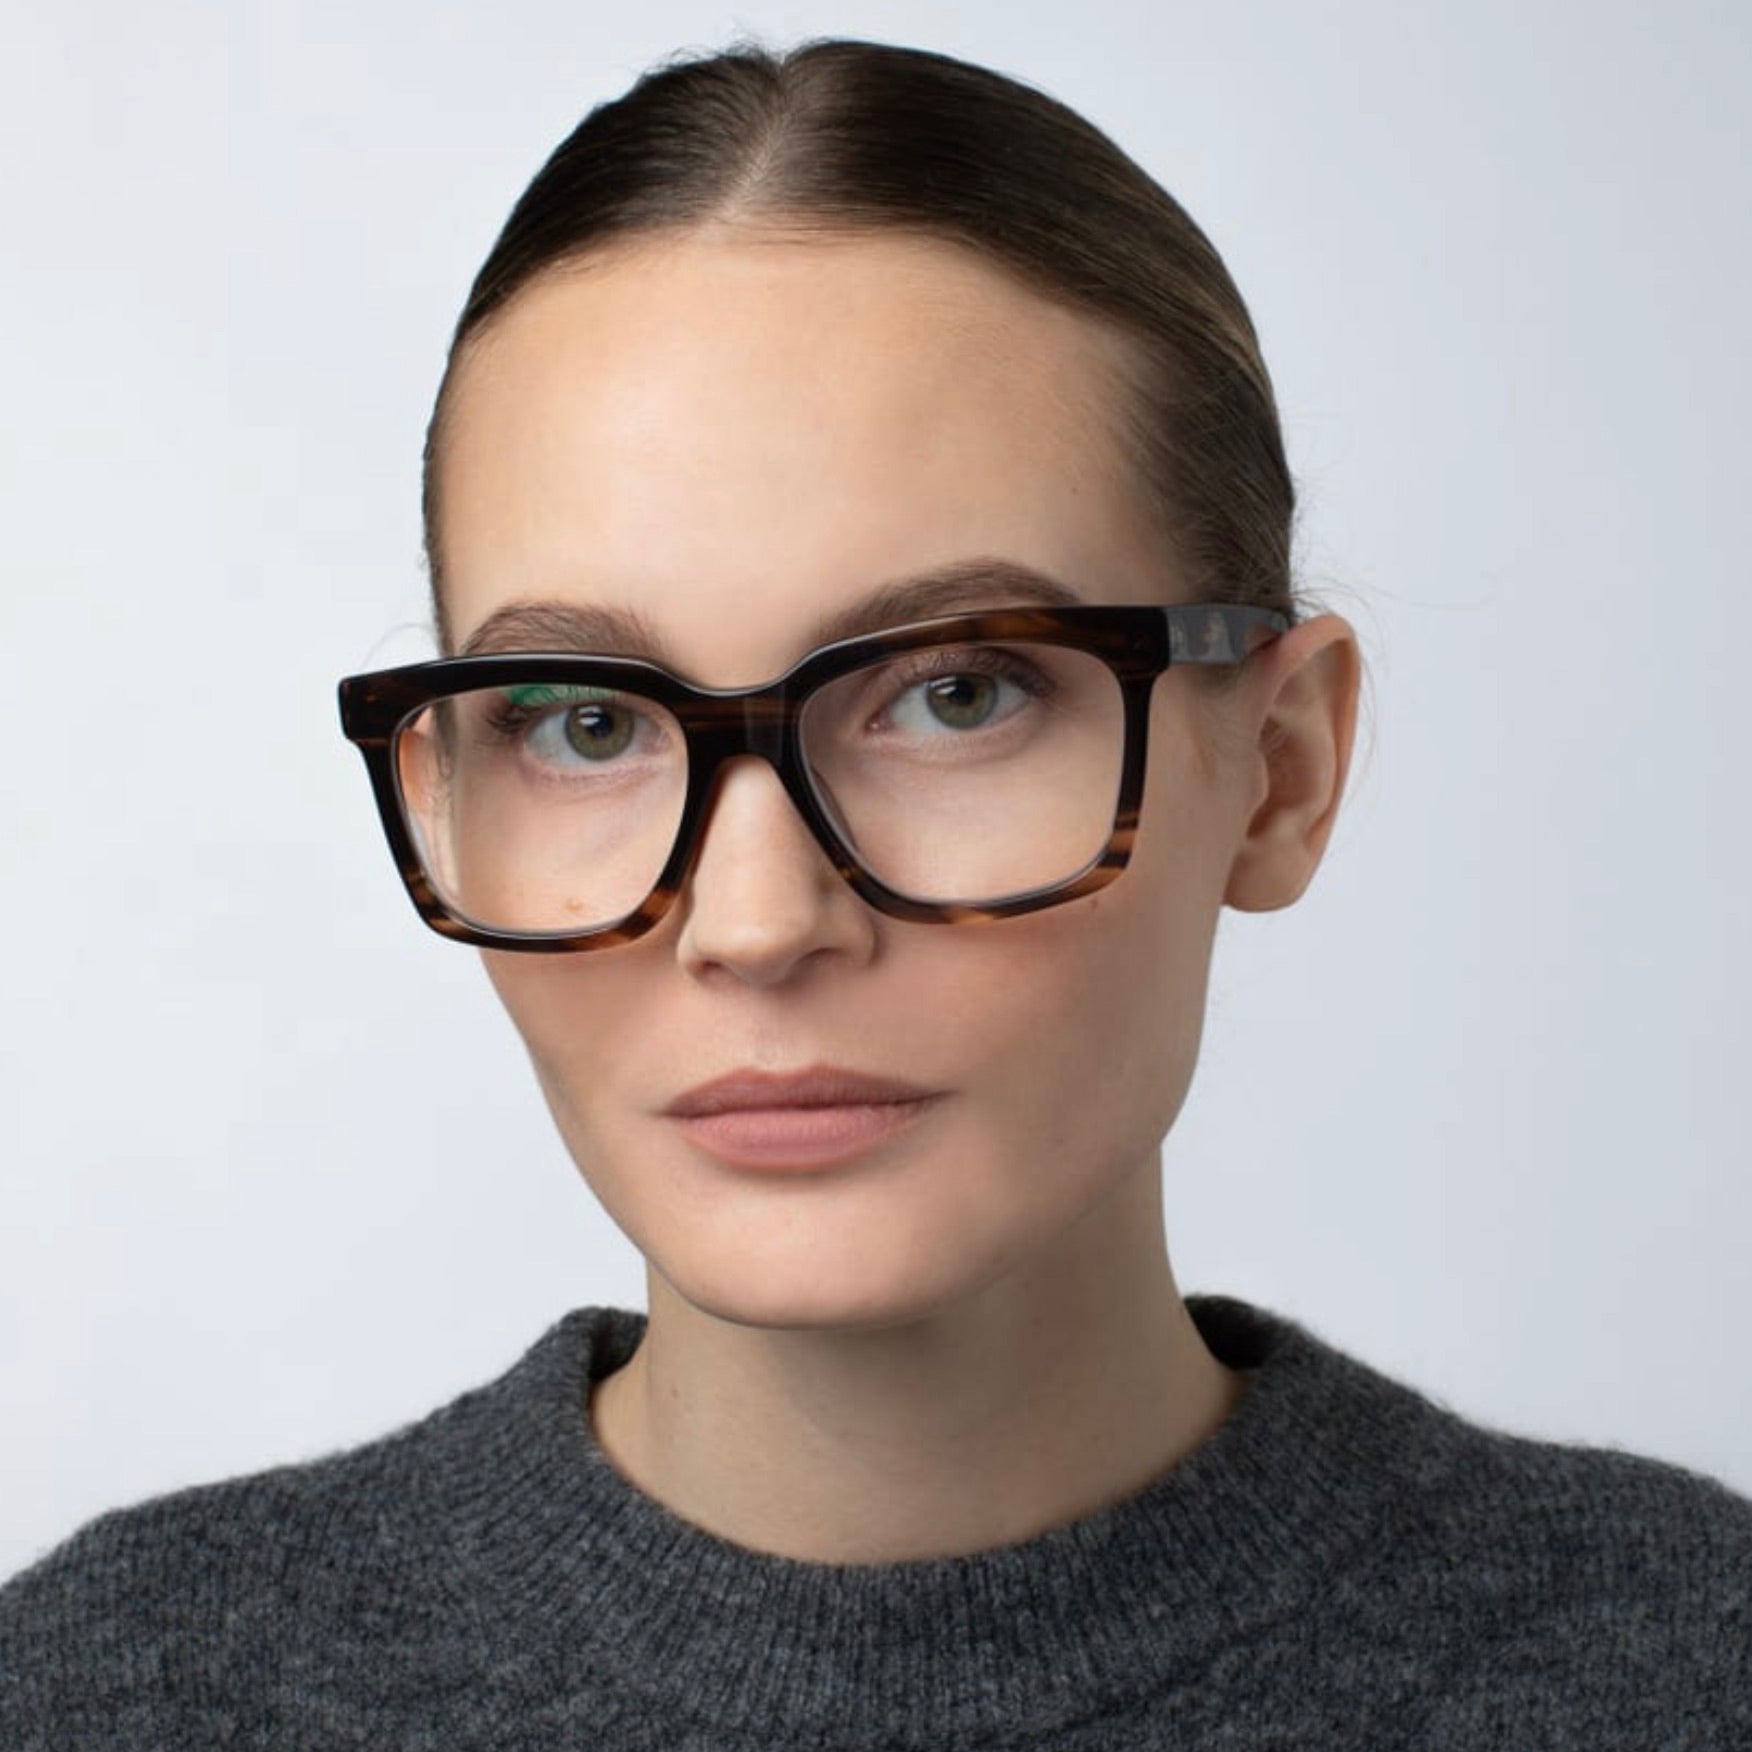 Dark Brown Therese Reading Glasses